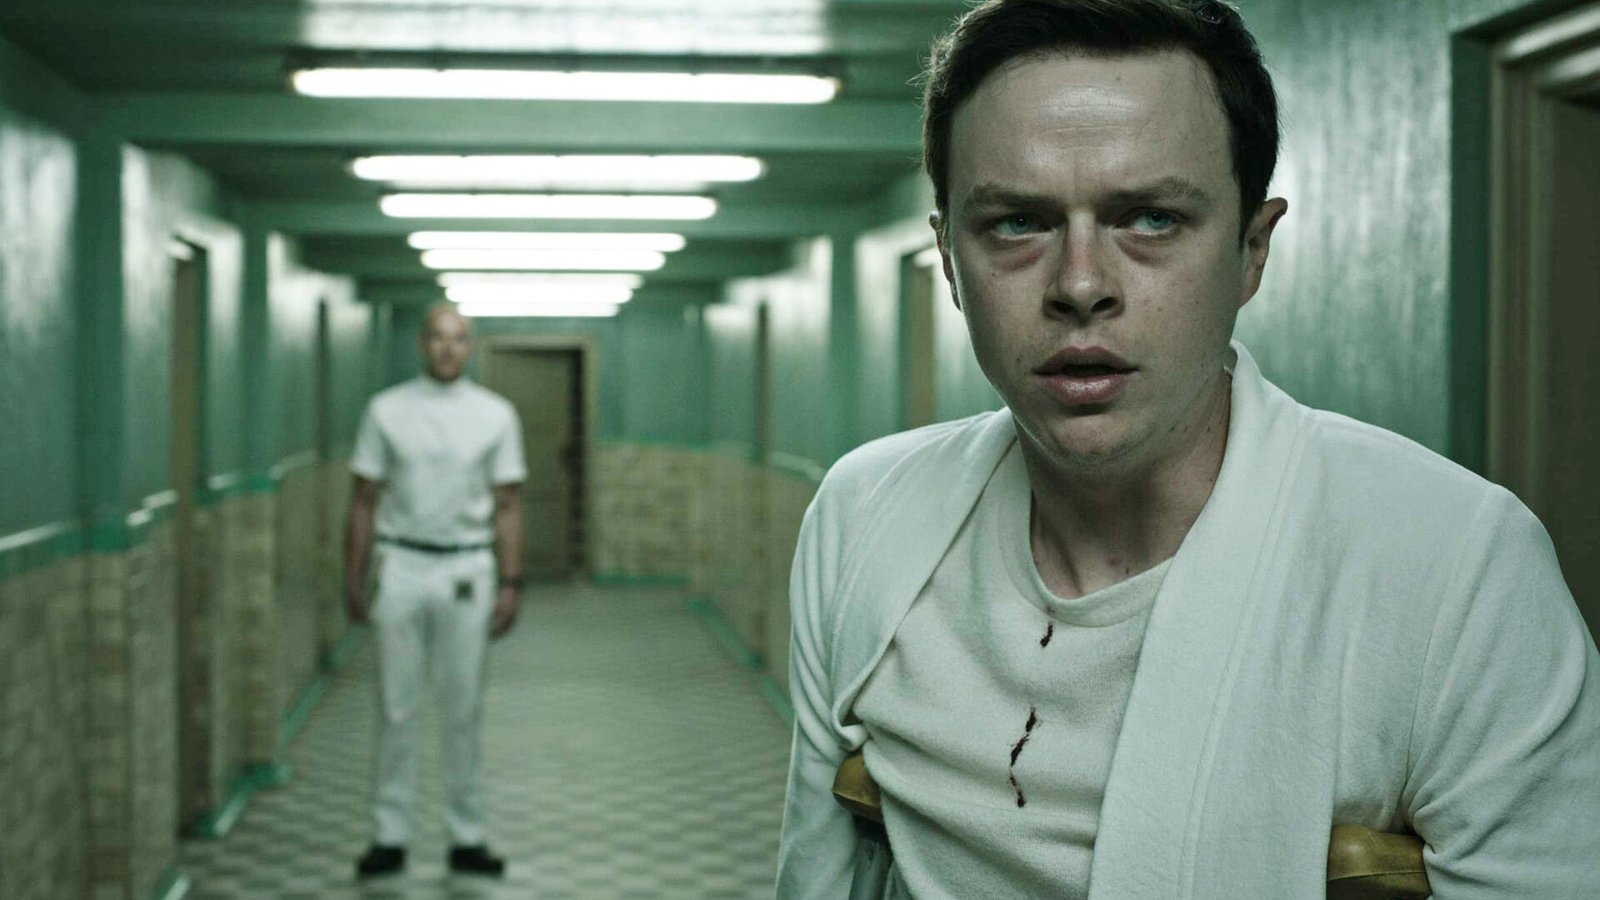 feel good movies on amazon prime: A Cure For Wellness